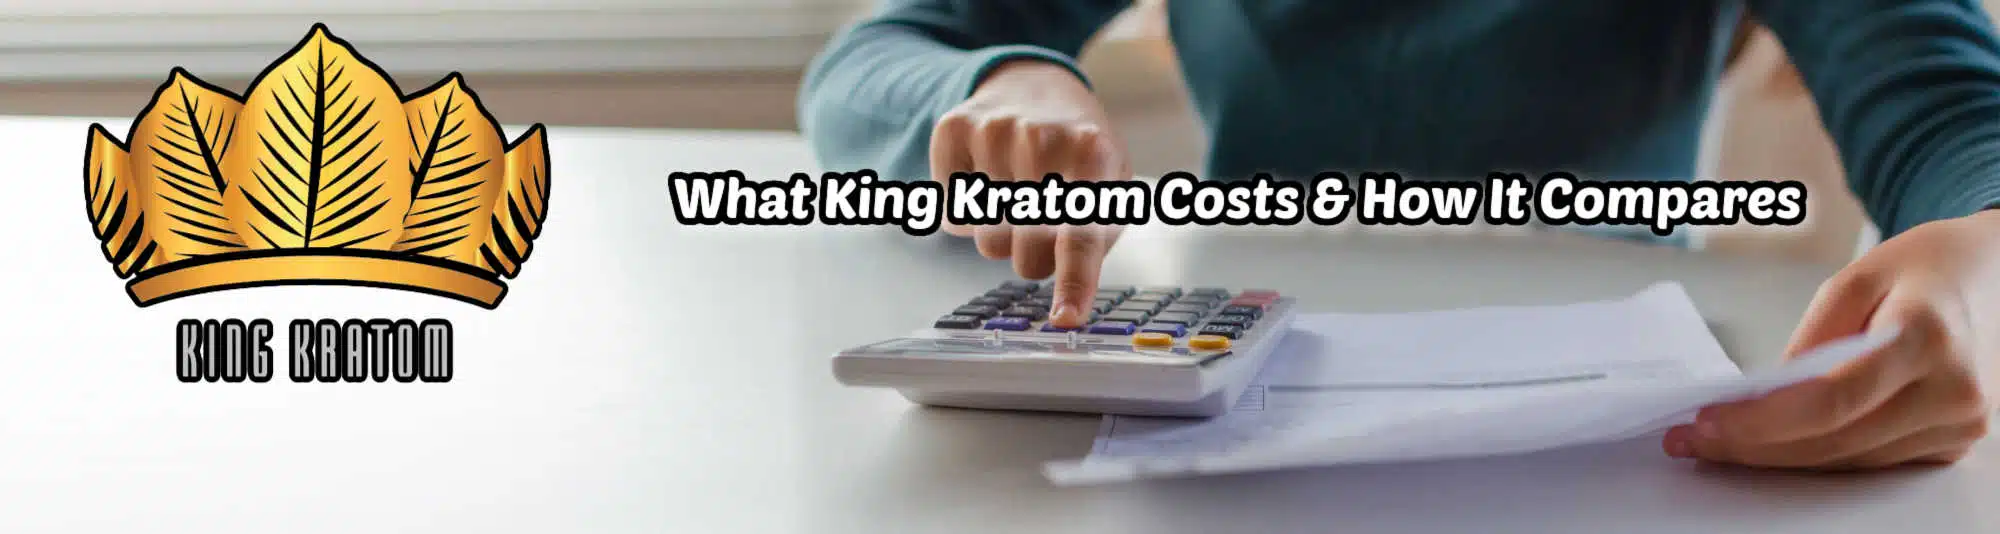 "What king kratom costs and how it compares" banner with company logo